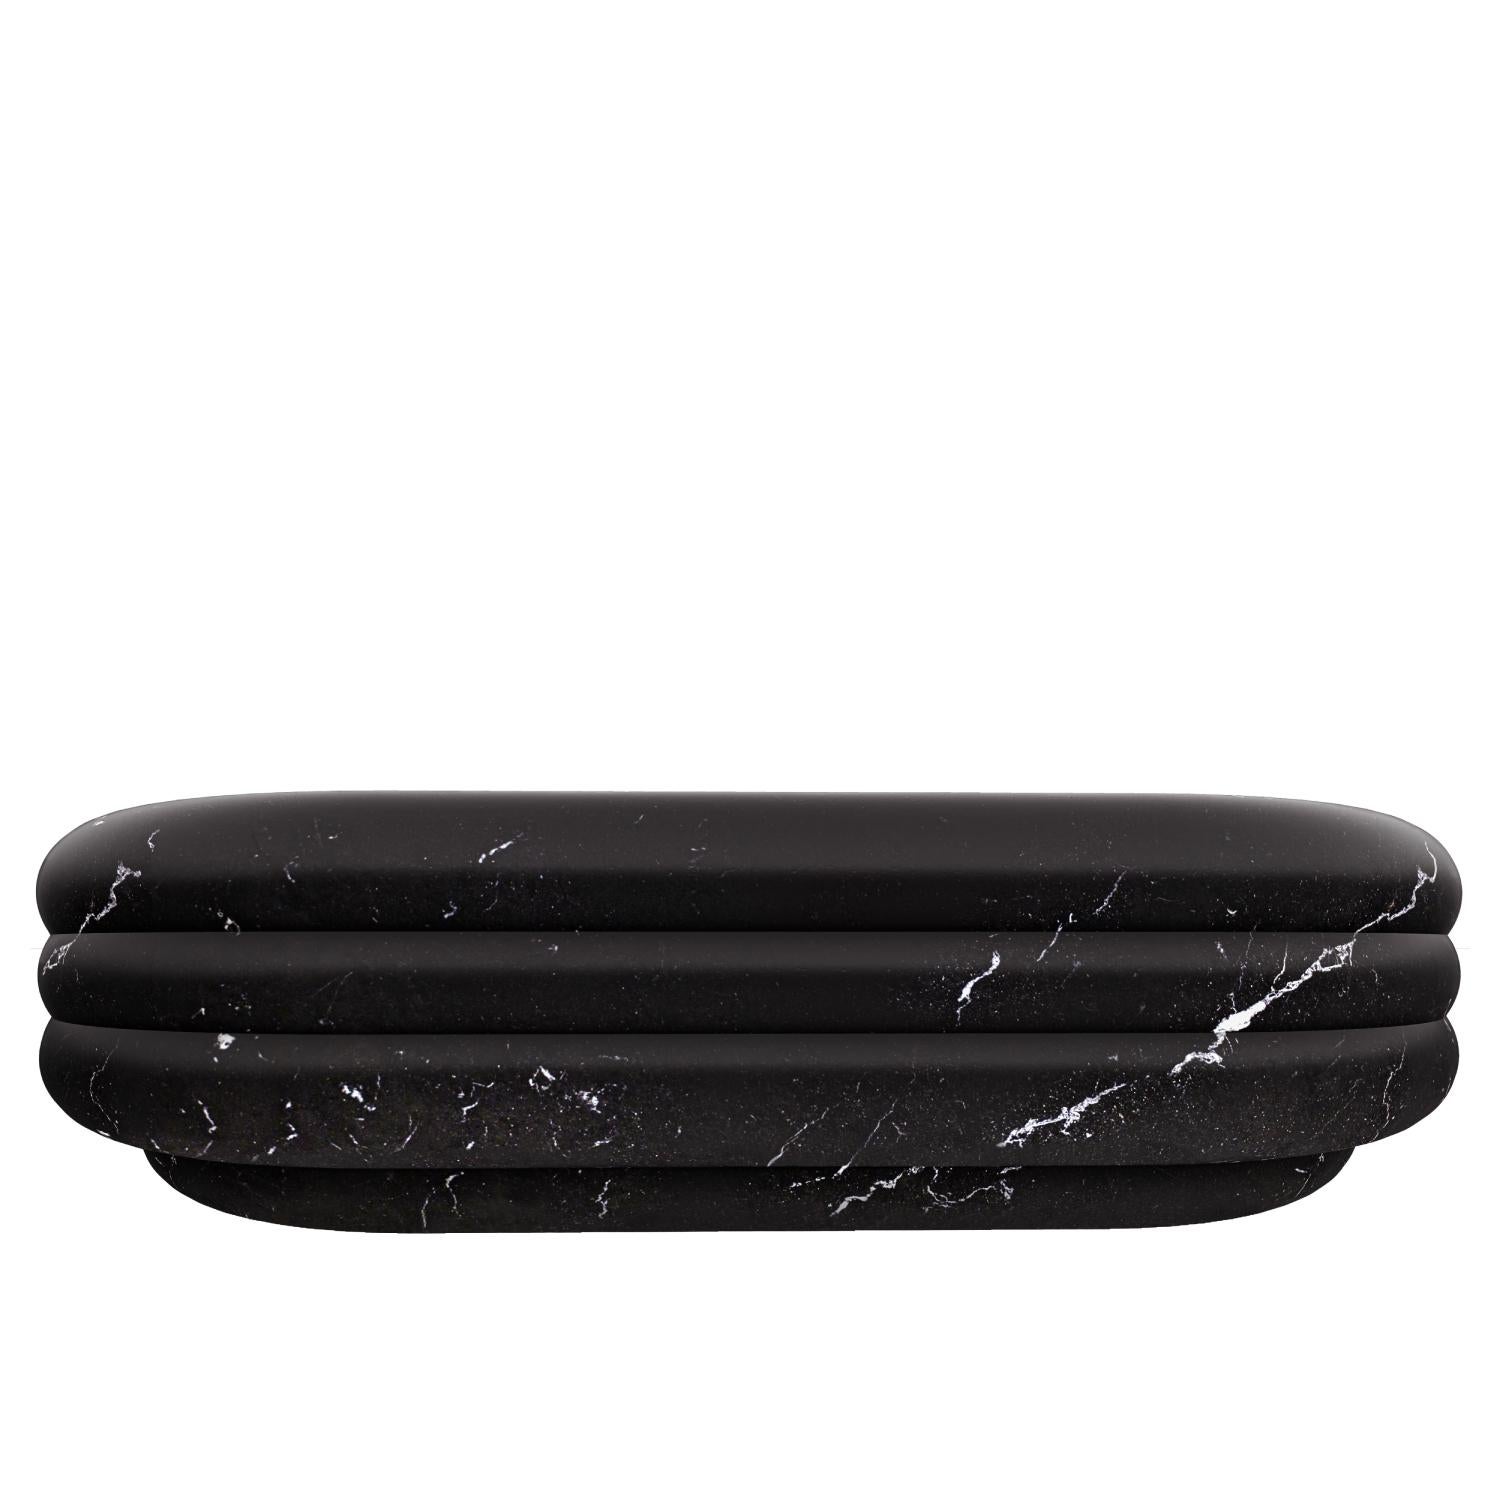 Chloe Black Marquina Marble Coffee Table by Fred and Juul
Dimensions: D 72 x W 120 x H 30 cm.
Materials: Black Marquina marble.

Available in White Carrara, Vert d'Estours, black Marquina and pink Portugal marble options. Custom sizes, materials or